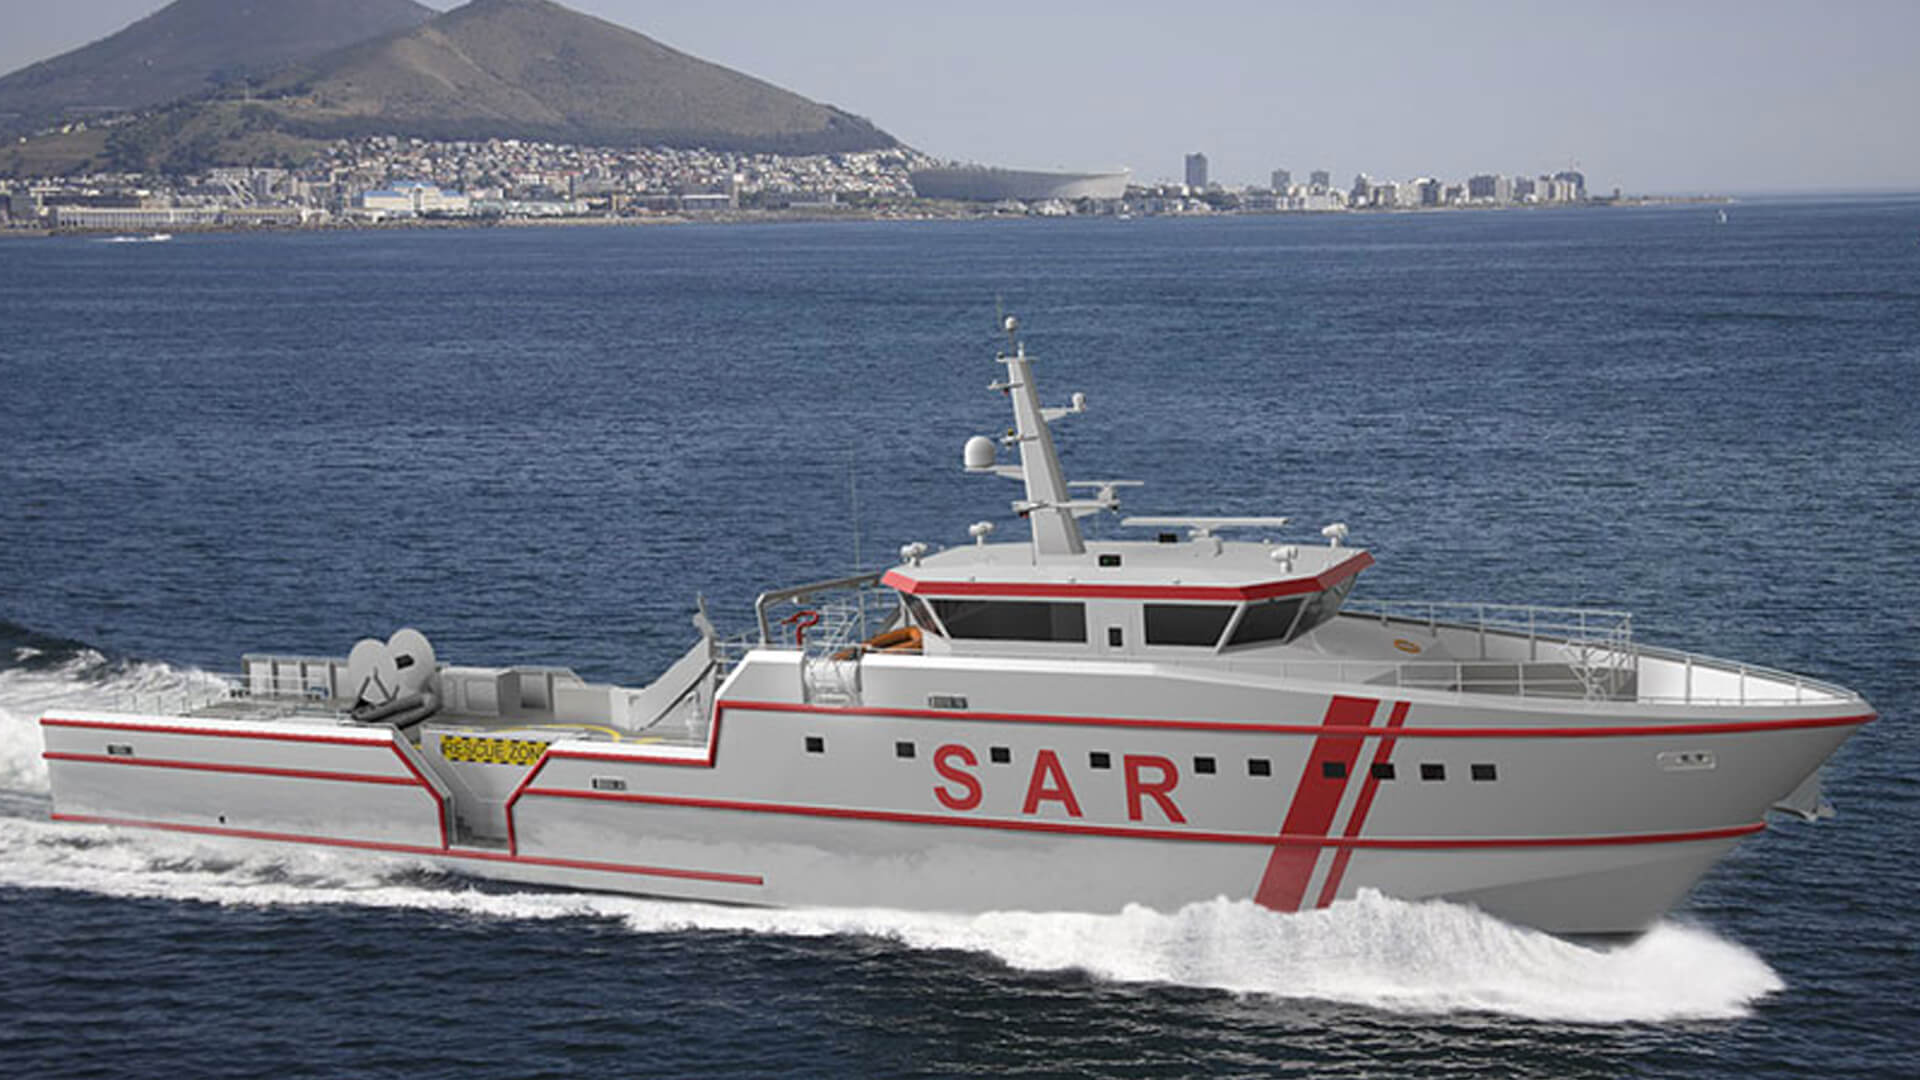 images/vessels/03-utility-support-craft/01-sar-ambulance-boats/01-ares-160-sar/01.jpg